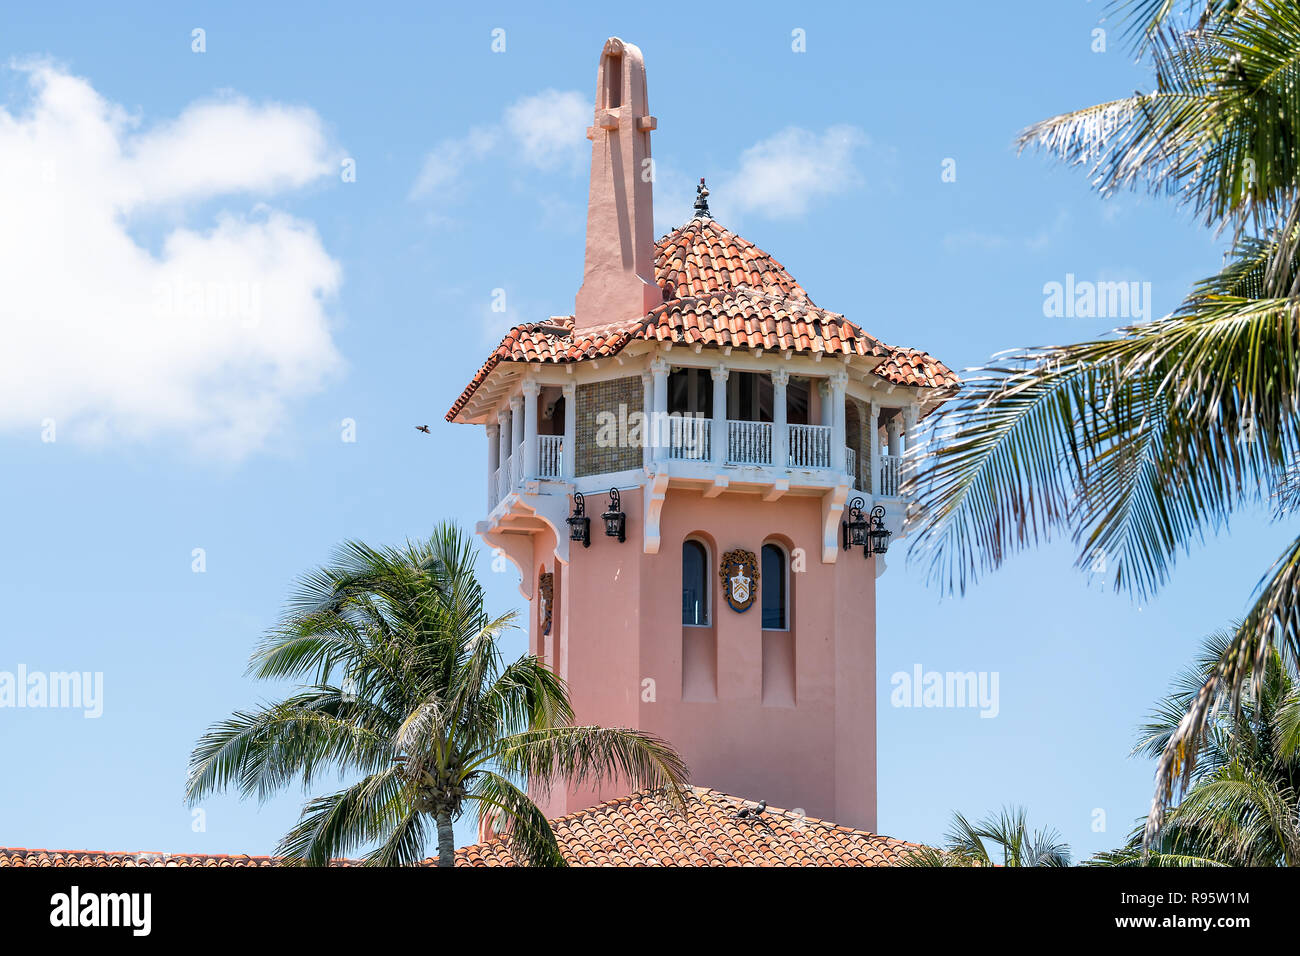 Palm Beach, USA - May 9, 2018: Mar-a-lago, mar a lago architecture, closeup of building tower, resort, presidential residence of Donald J Trump, ameri Stock Photo